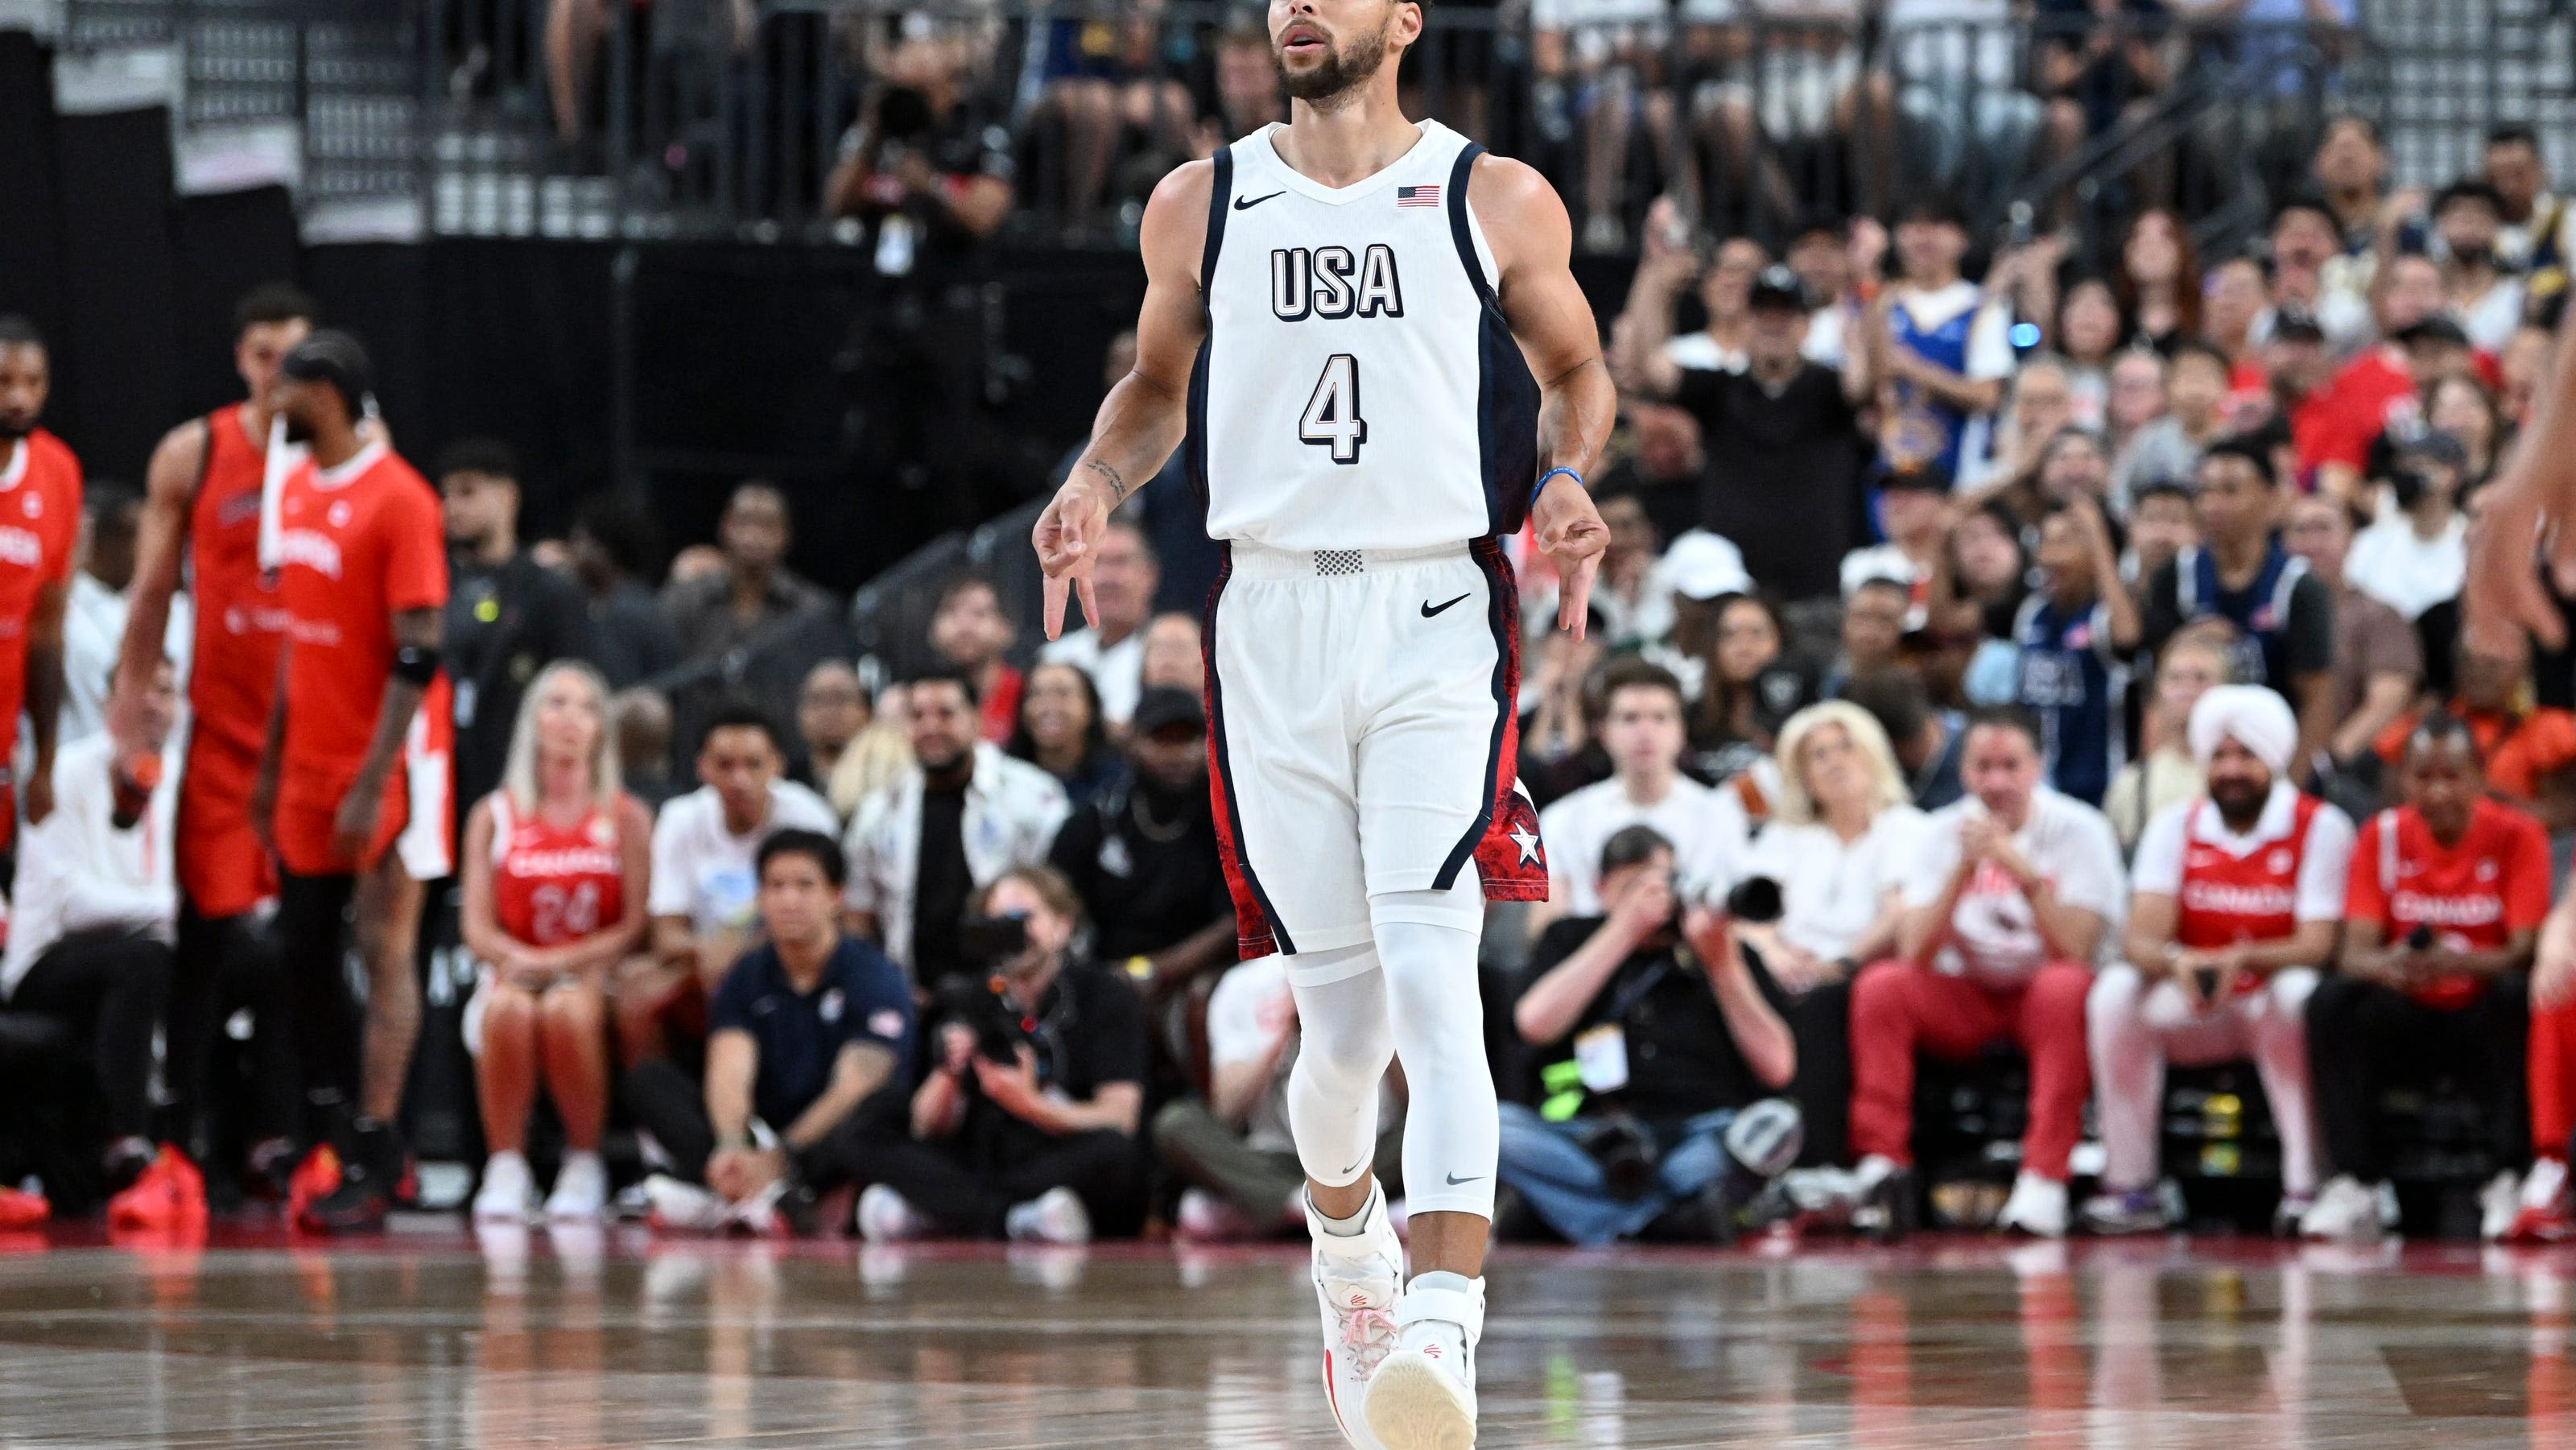 USA vs Germany: Time, TV channel, streaming for USA Basketball Showcase exhibition